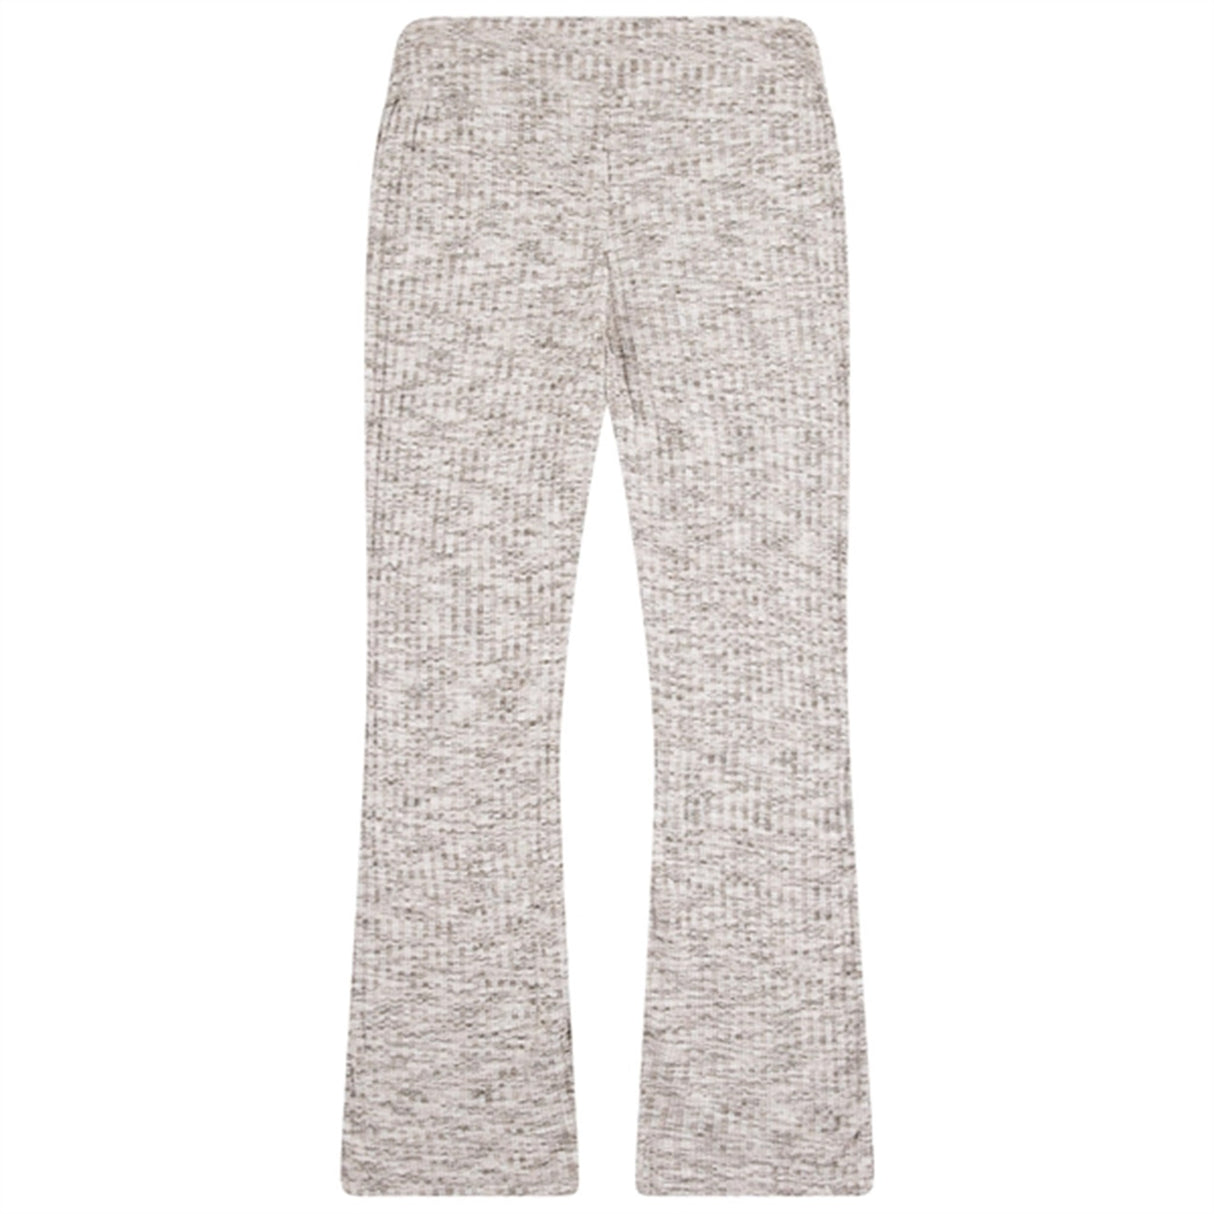 Levi's Space Dye Flared Knit Pants Creme Brulee 4